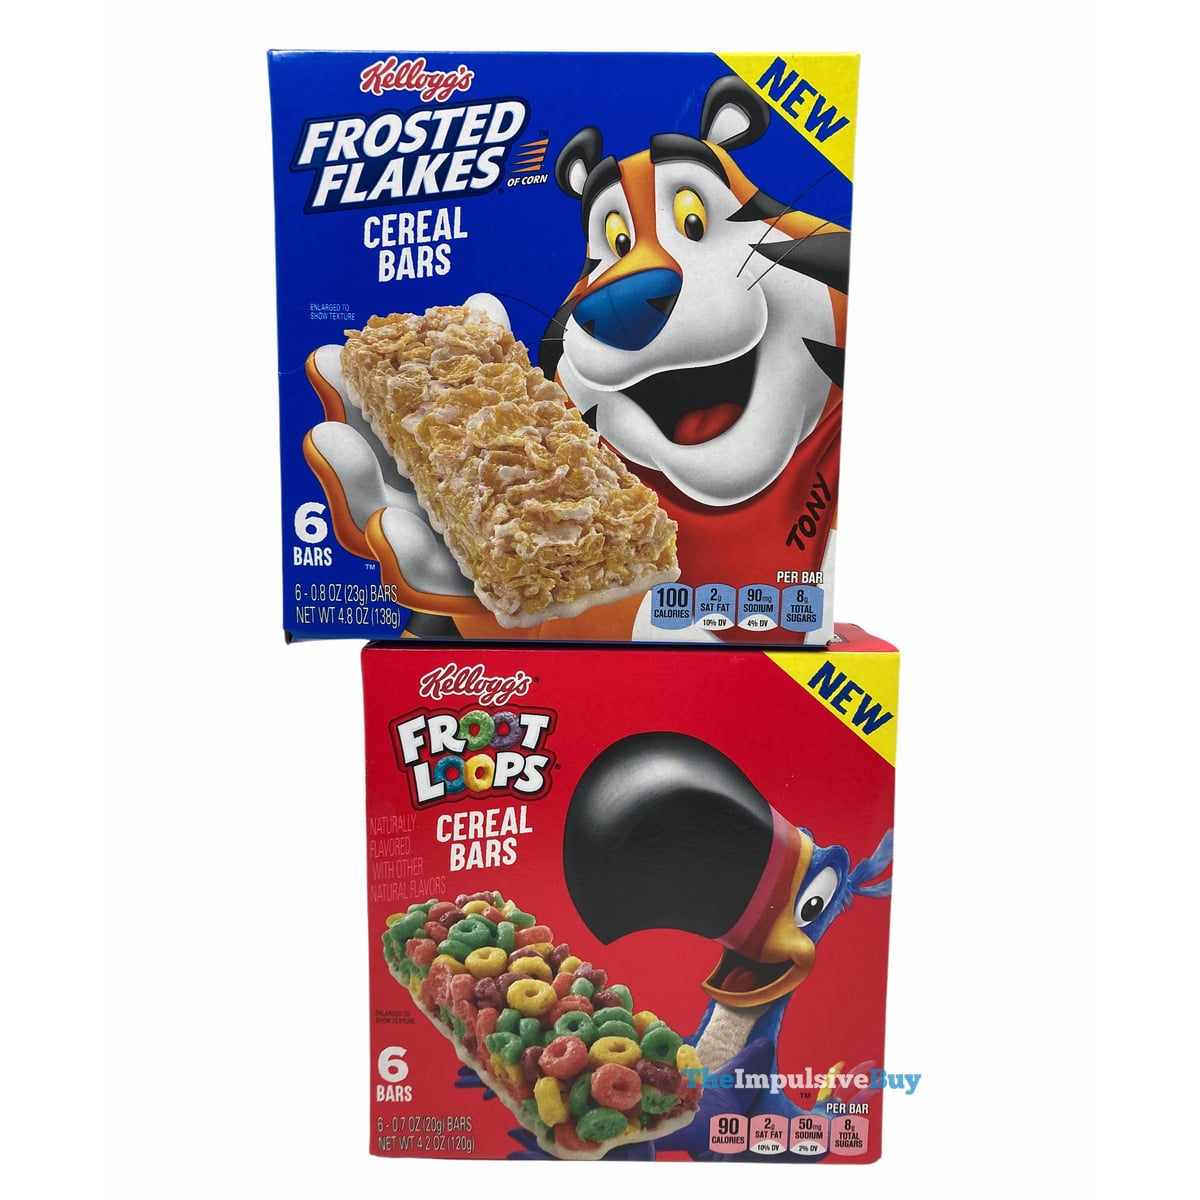 https://www.theimpulsivebuy.com/wordpress/wp-content/uploads/2020/12/Kelloggs-Frosted-Flakes-and-Froot-Loops-Cereal-Bars-Boxes.jpeg